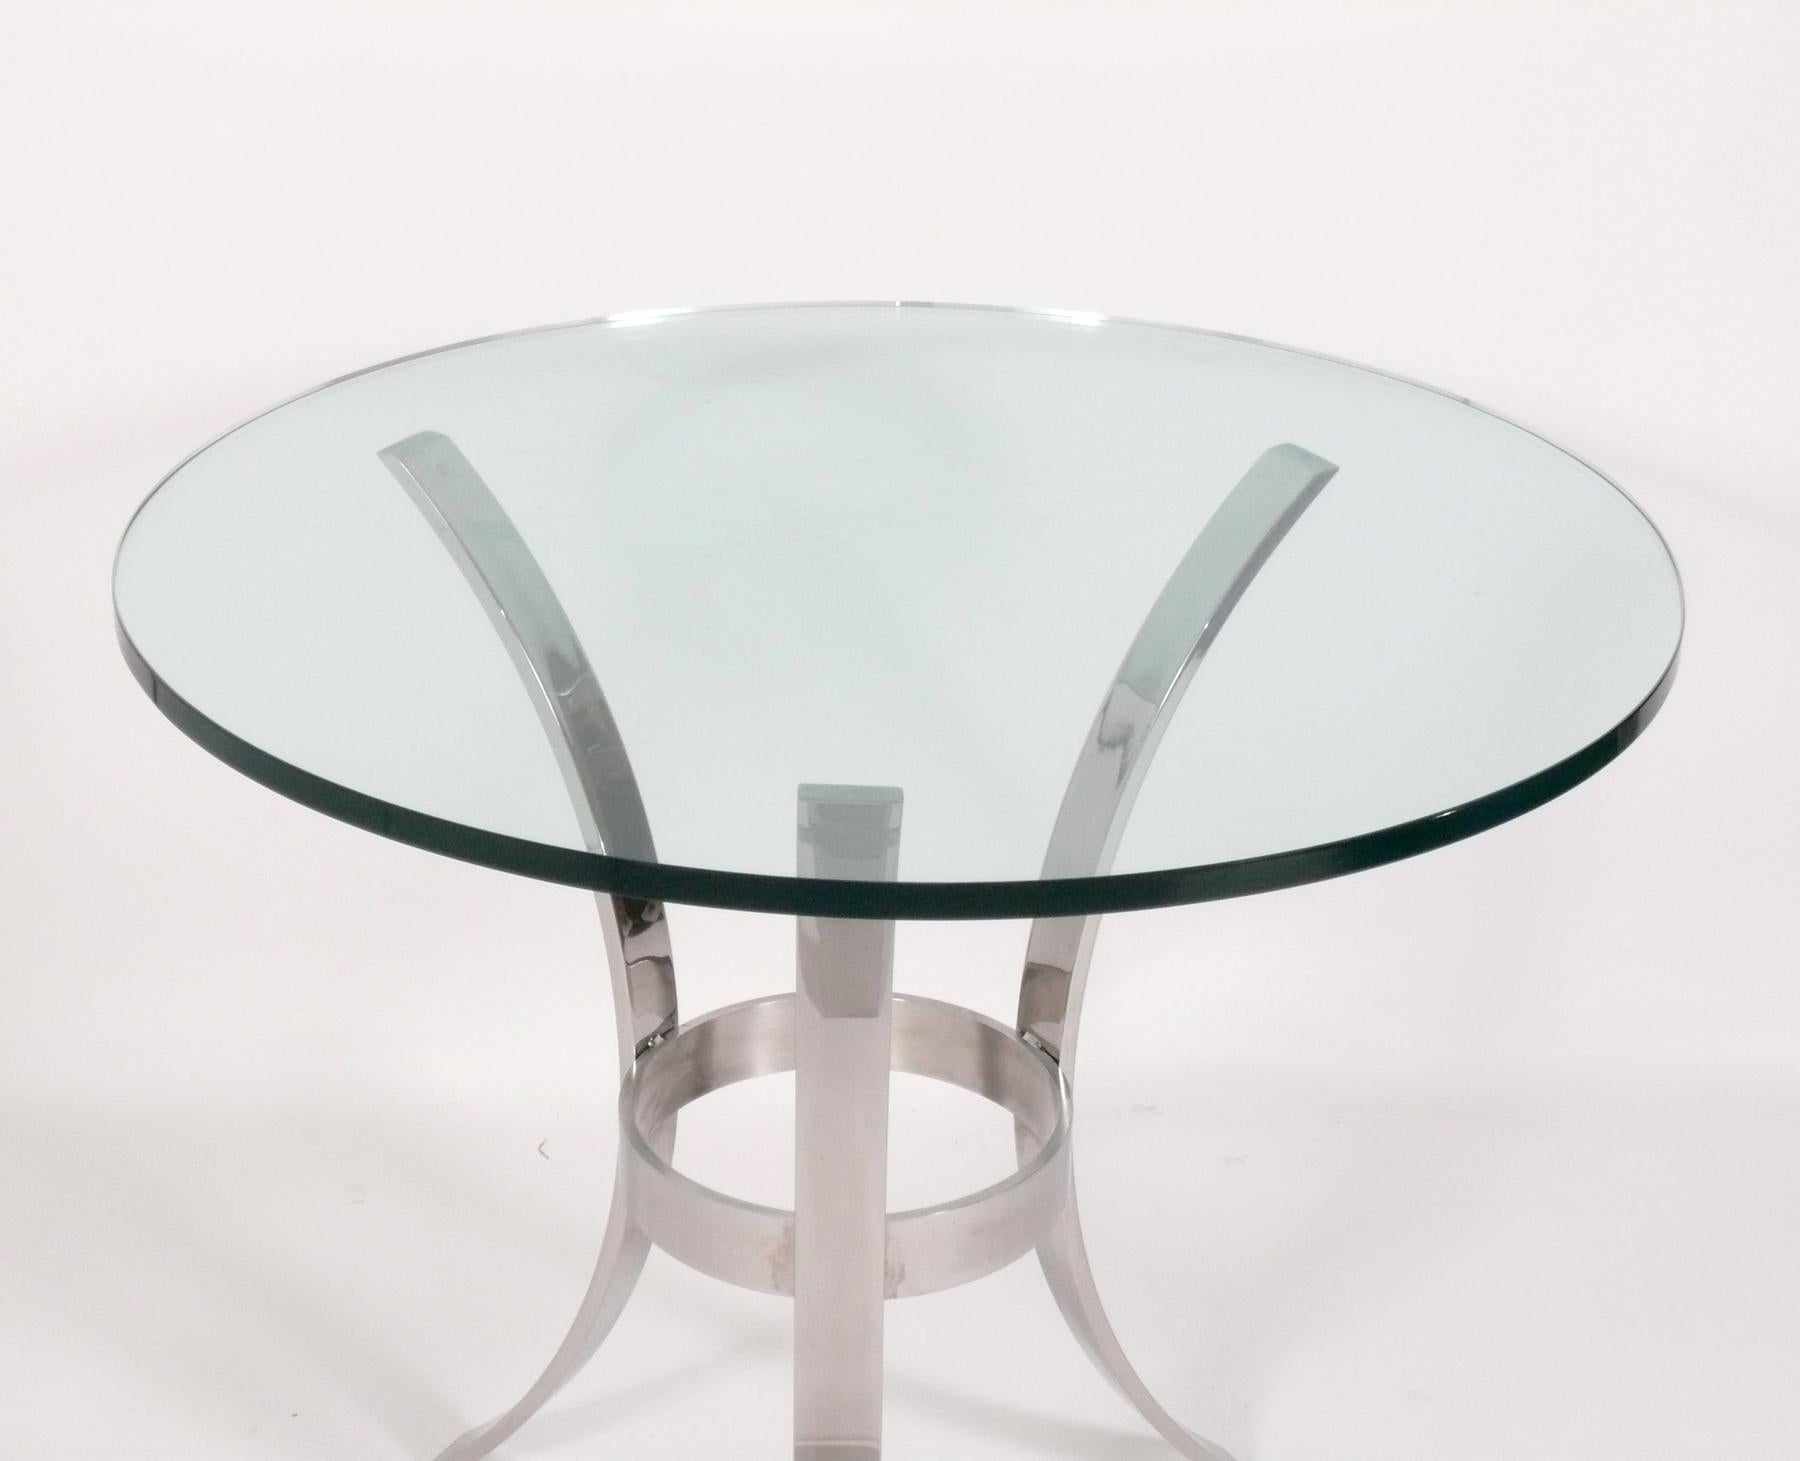 Heavy well constructed Modernist chrome center table, attributed to John Vesey, unsigned, American, circa 1960s. It is a versatile Size and can be used as a center table, side or end table, or nightstand.